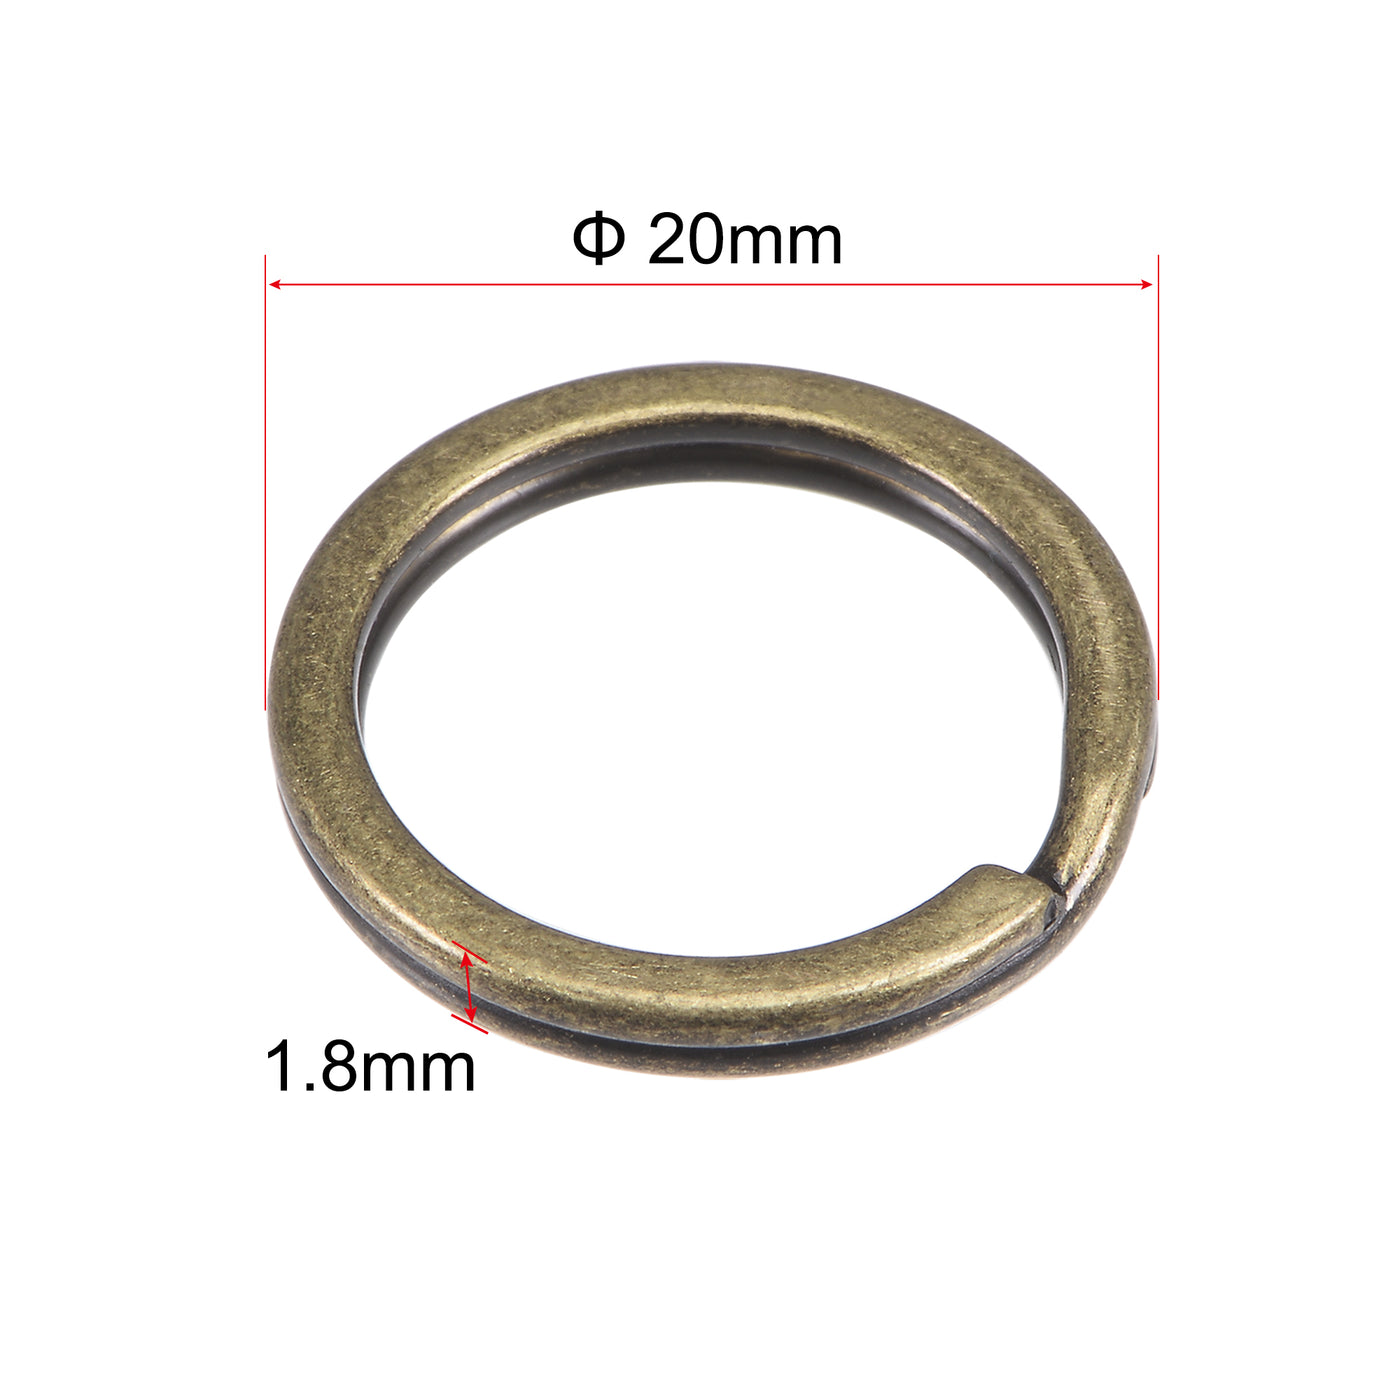 Uxcell Uxcell Split Key Ring 32mm Open Flat Jump Connector for Lanyard Zipper Handbag, Electroplated Iron, Bronze Pack of 20